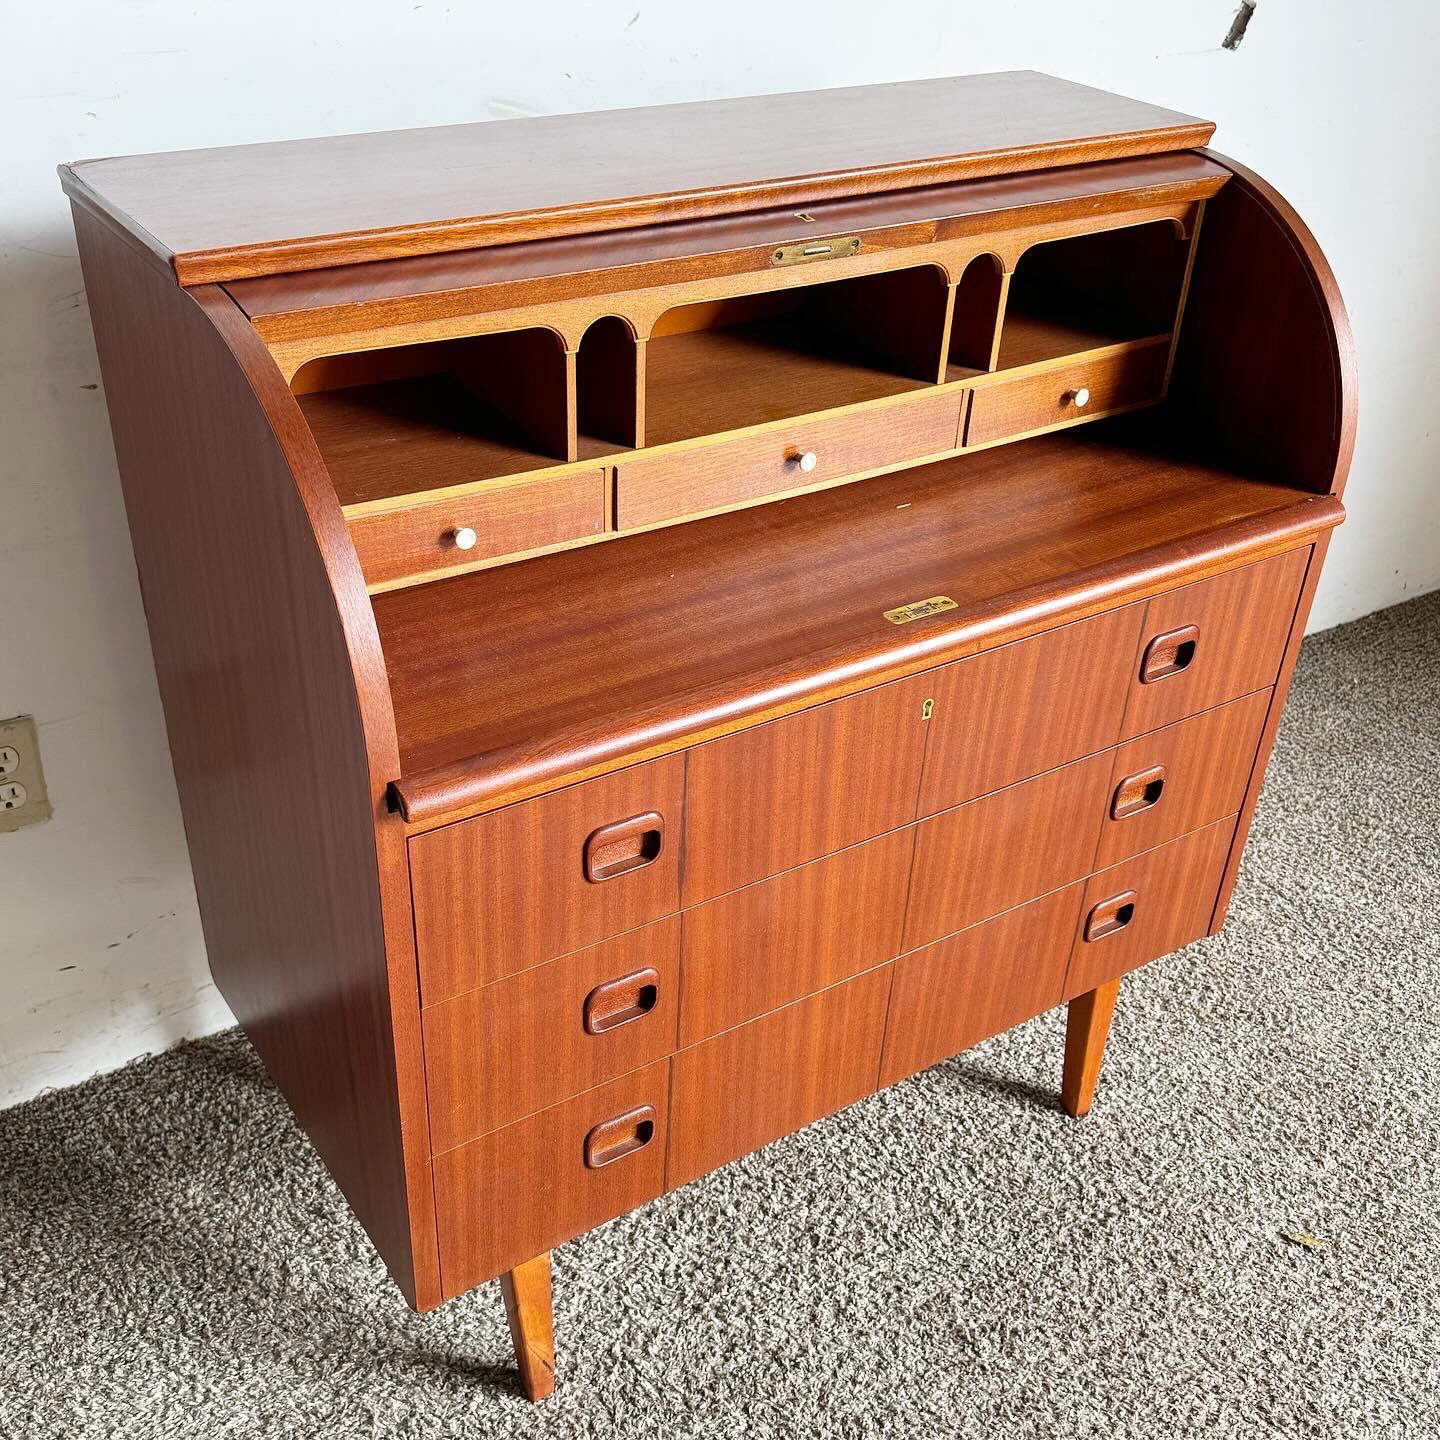 Embrace Scandinavian elegance with the Mid Century Modern Swedish Rolltop Secretary Desk by Egon Ostergaard. This desk, standing at 28.5 inches to the tabletop, features a distinctive rolltop design that extends from 8 to 17 inches, offering